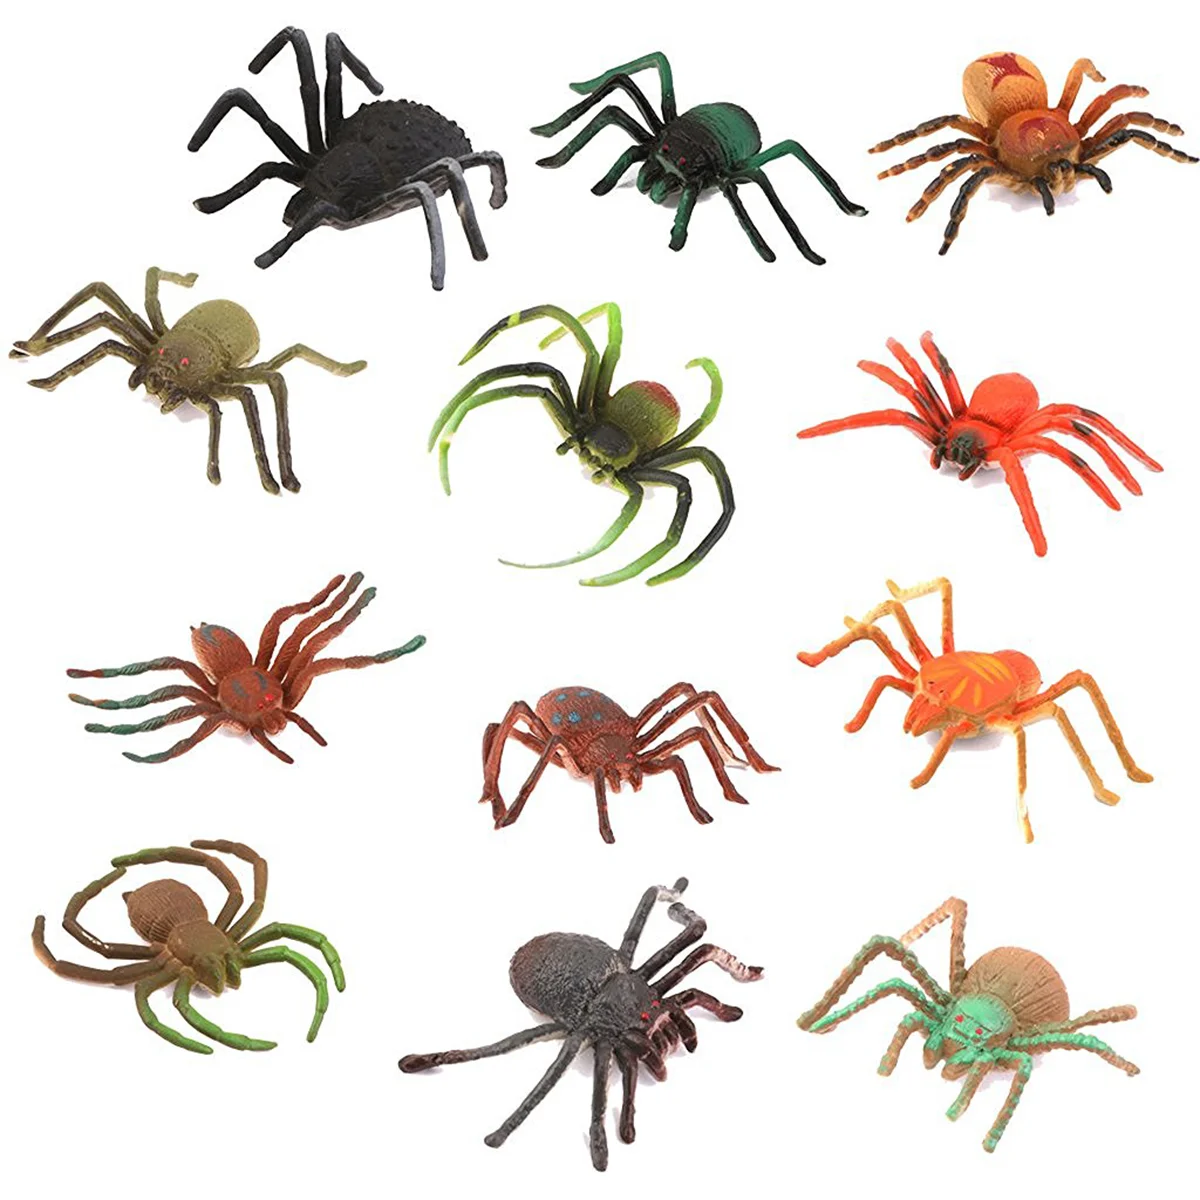 

Spider Halloween Spiders Decorations Toy Outdoorfake Prank Toys Prop Action Animal Decor Decoration Scary Model Figurine Trick